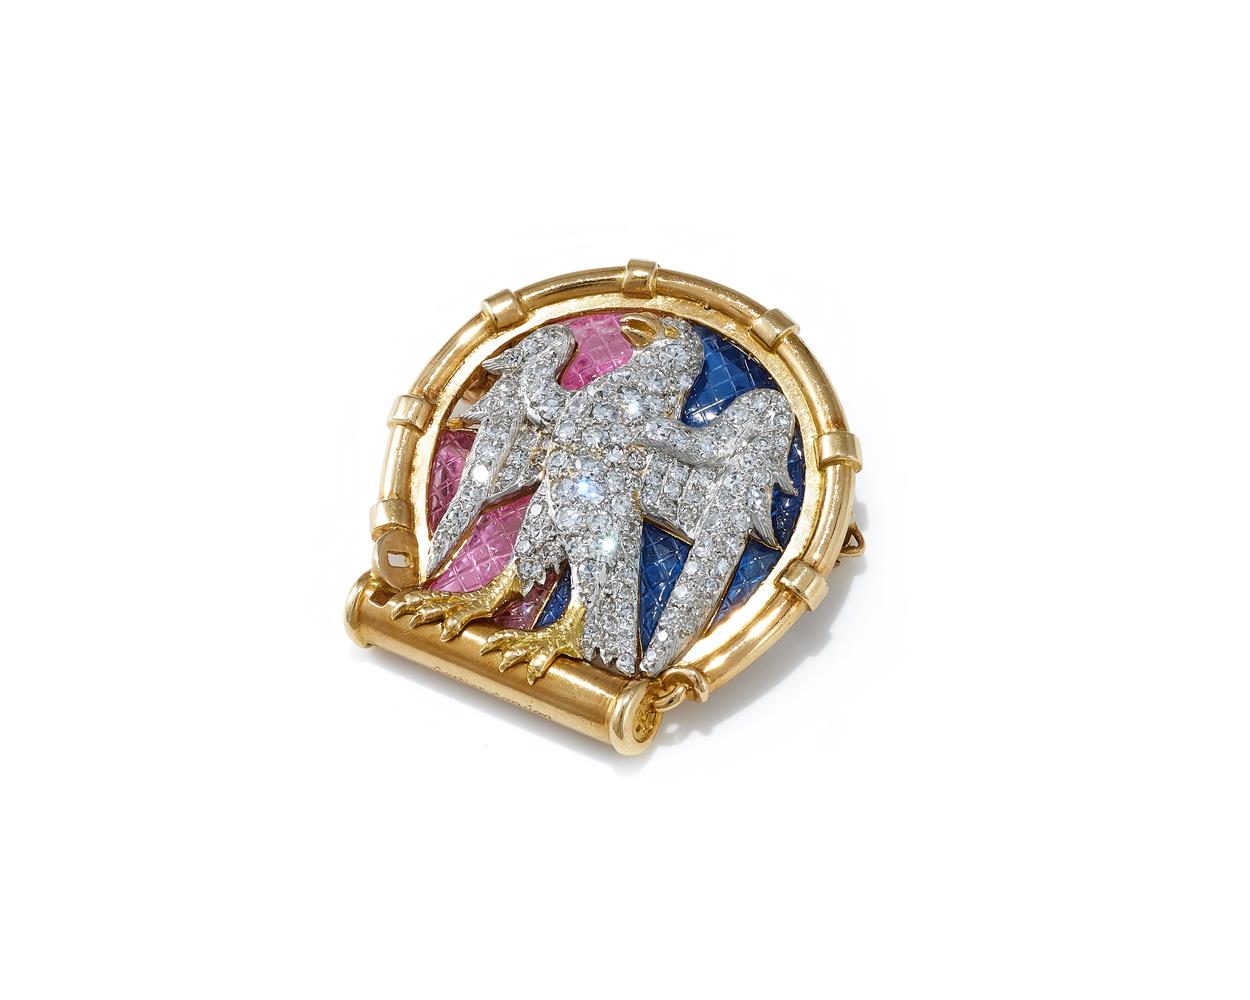 CARTIER, THE 'ELTHAM PALACE' DIAMOND AND GEM SET BROOCHES - Image 3 of 7